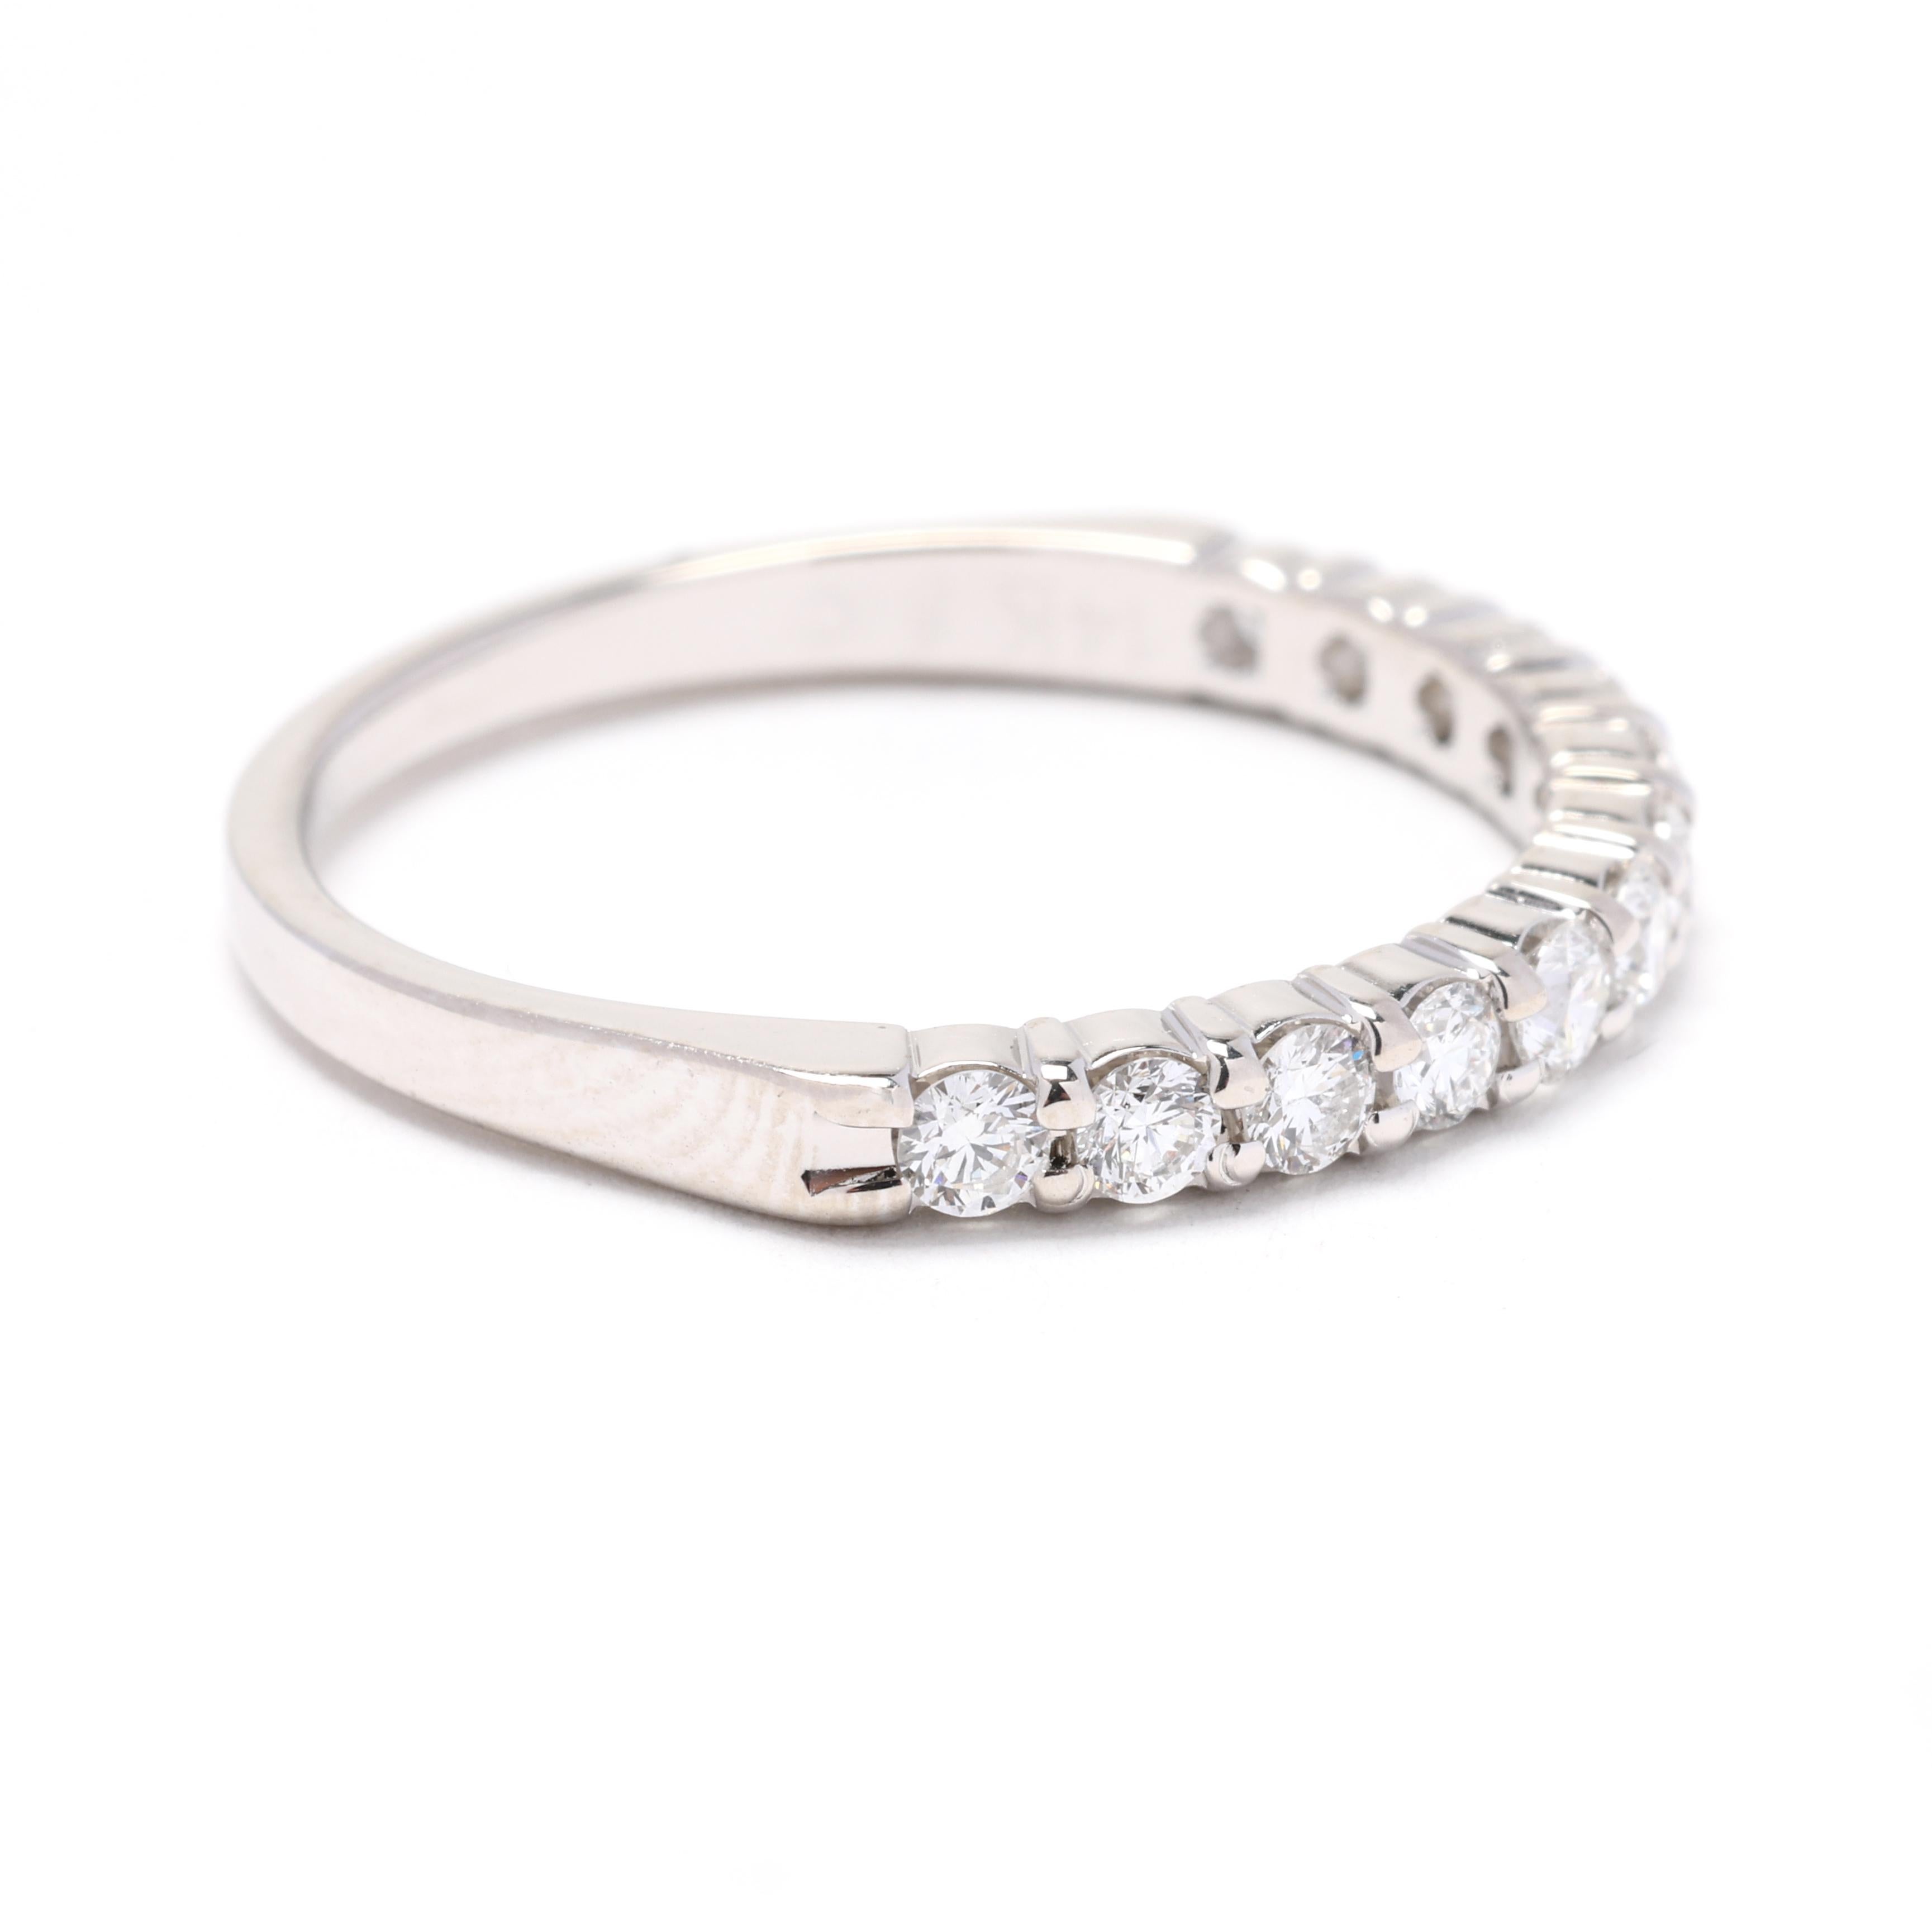 This 0.50ctw diamond wedding band is a beautiful and classic choice for your special day. Set in 14k white gold, this ring features a row of round-cut diamonds that sparkle and shine. The diamonds have a total weight of 0.50 carats and are prong-set